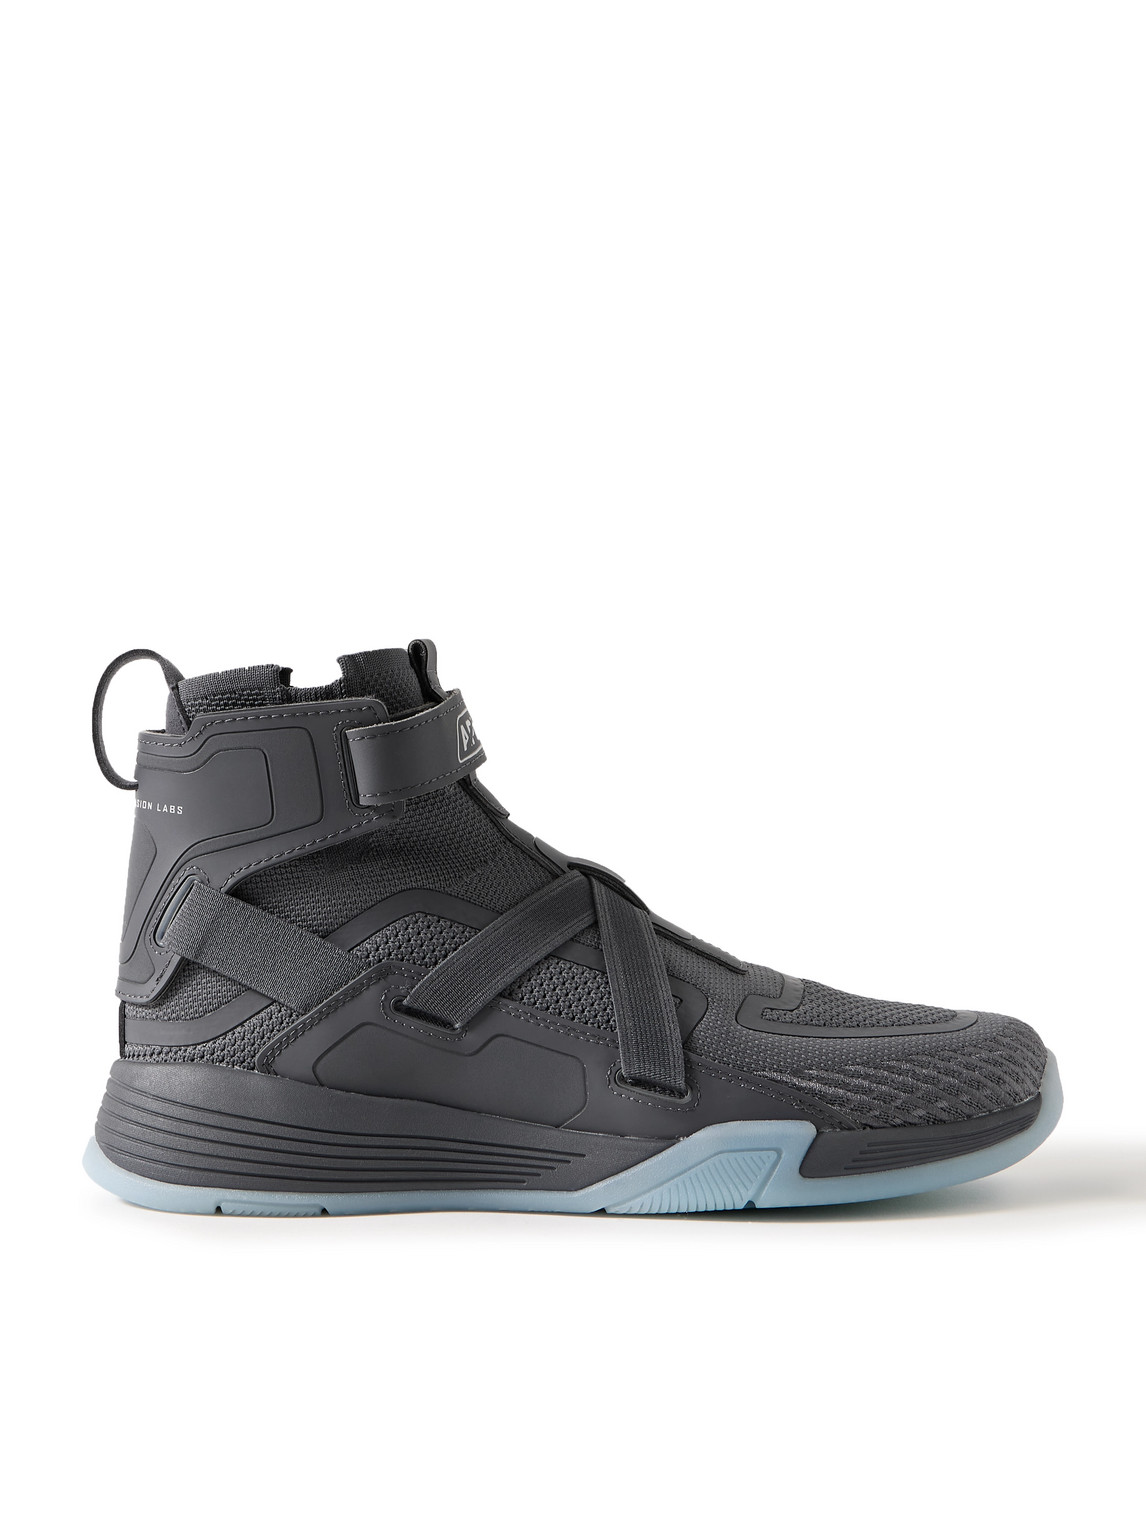 SUPERFUTURE Rubber-Trimmed TechLoom High-Top Sneakers